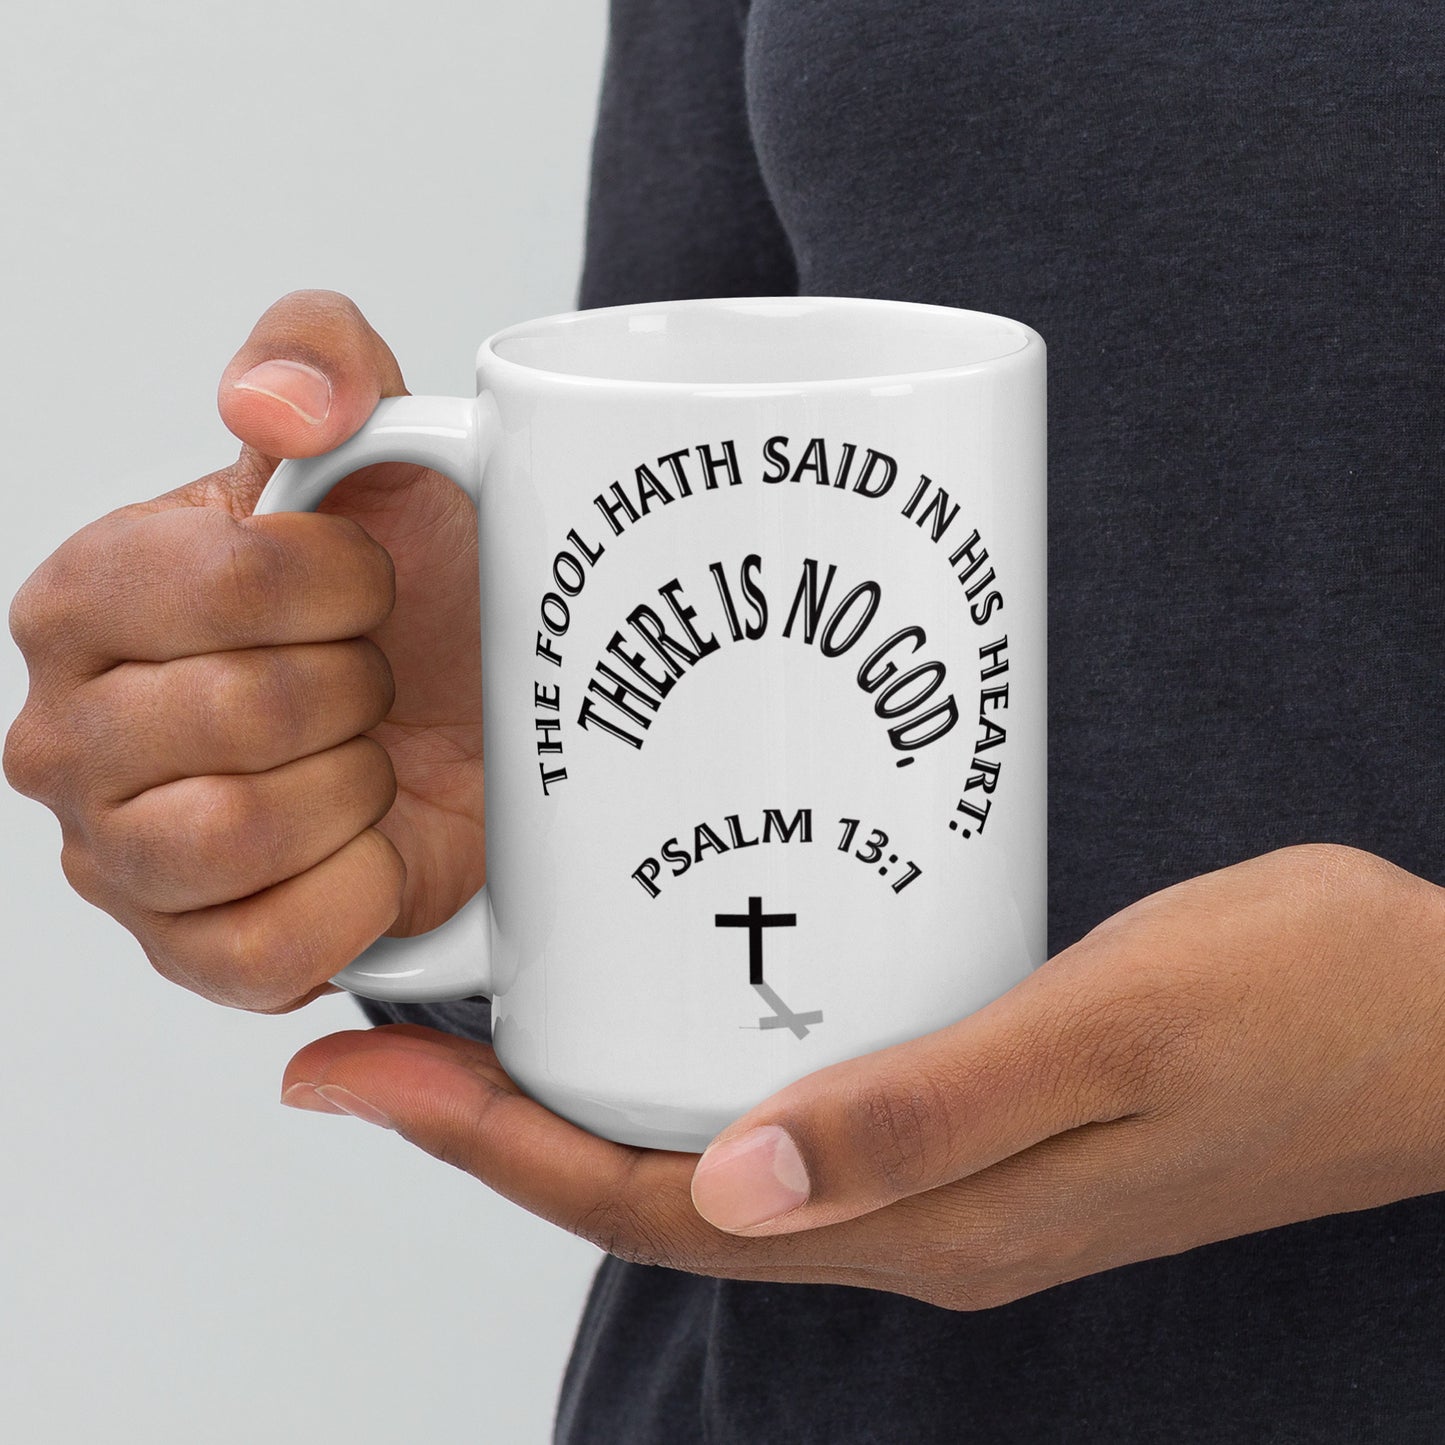 The Fool Says There is No God Psalm 13:1 White glossy mug